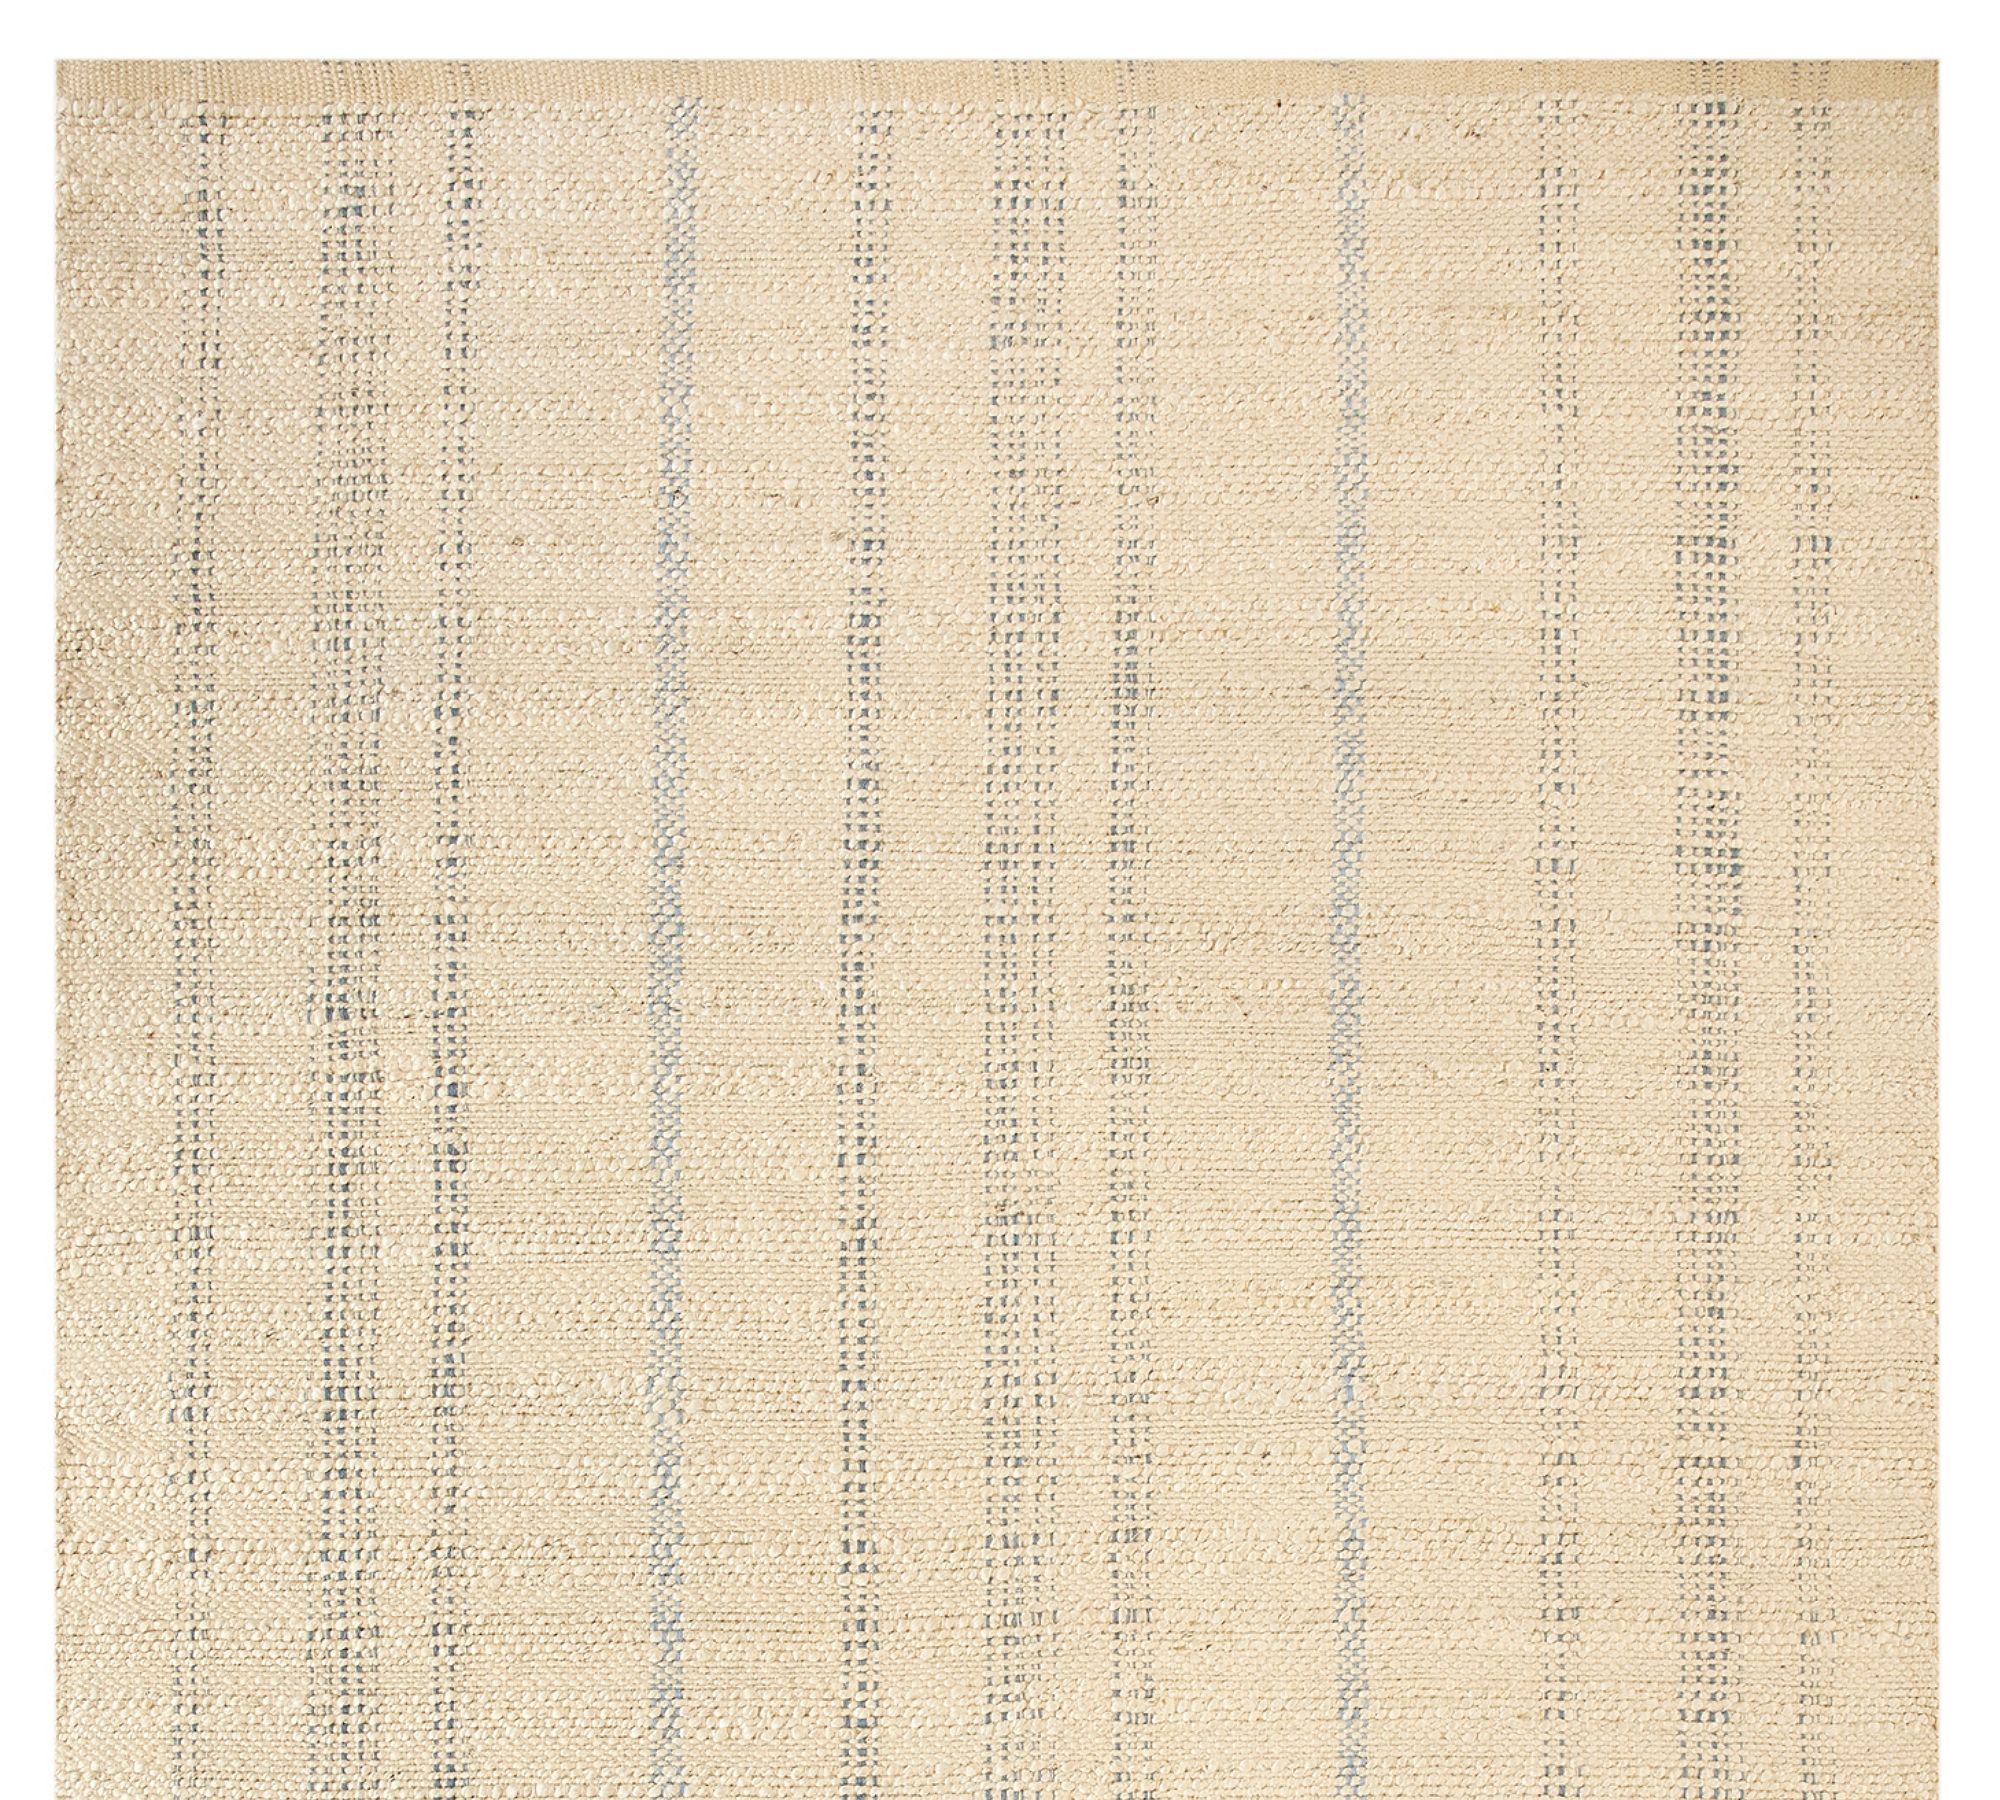 Willow Stripe Rug Swatch - Free Returns Within 30 Days